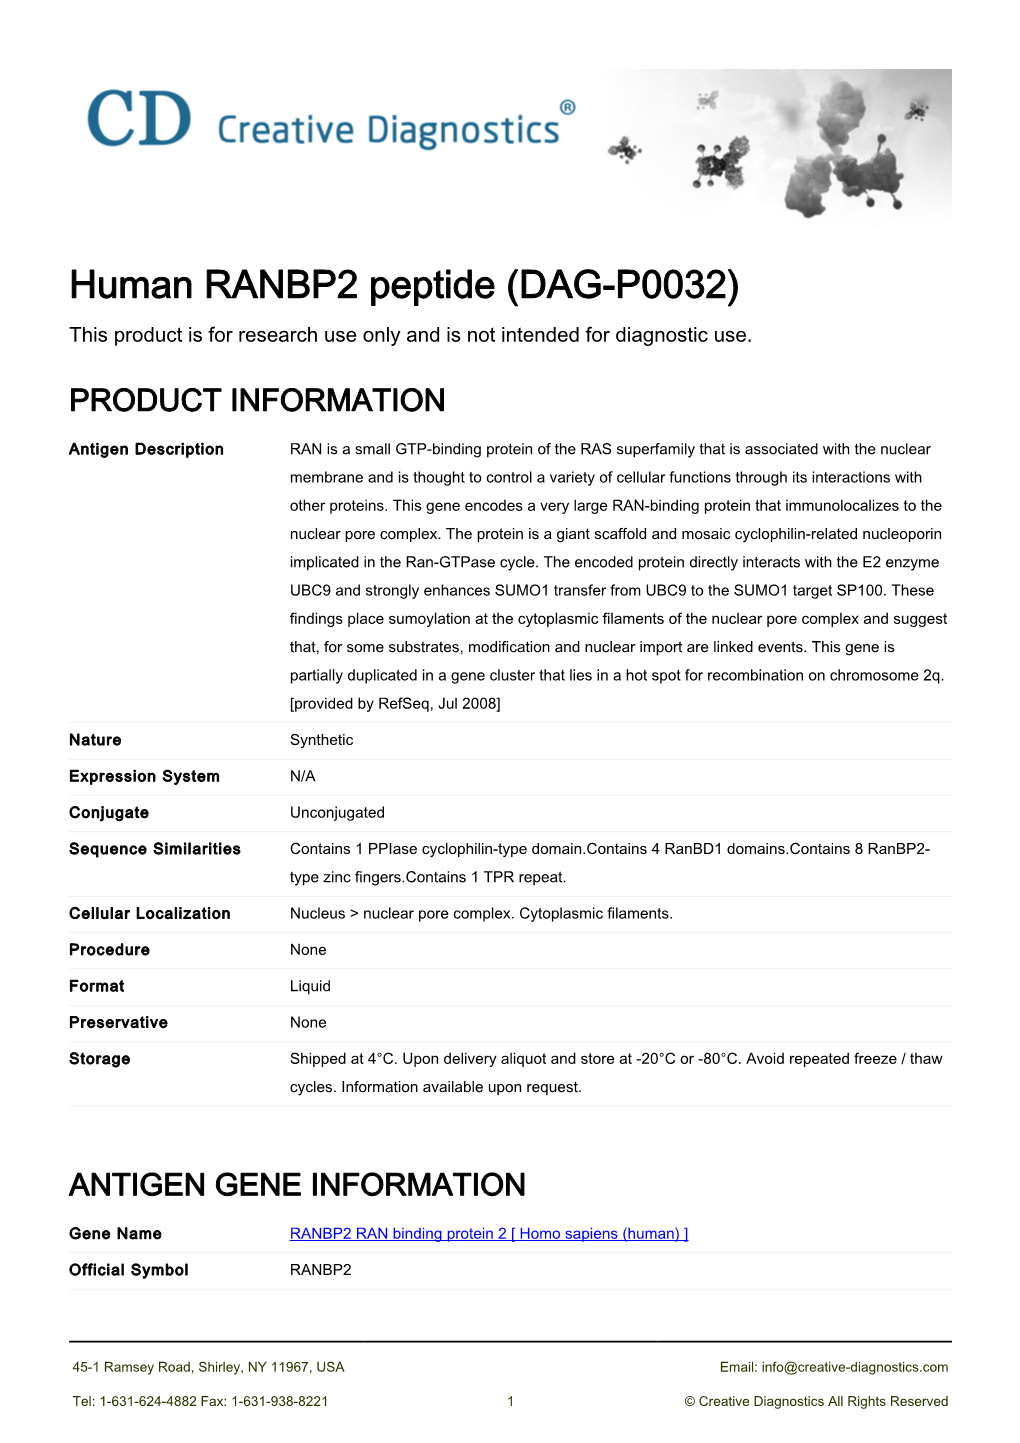 Human RANBP2 Peptide (DAG-P0032) This Product Is for Research Use Only and Is Not Intended for Diagnostic Use